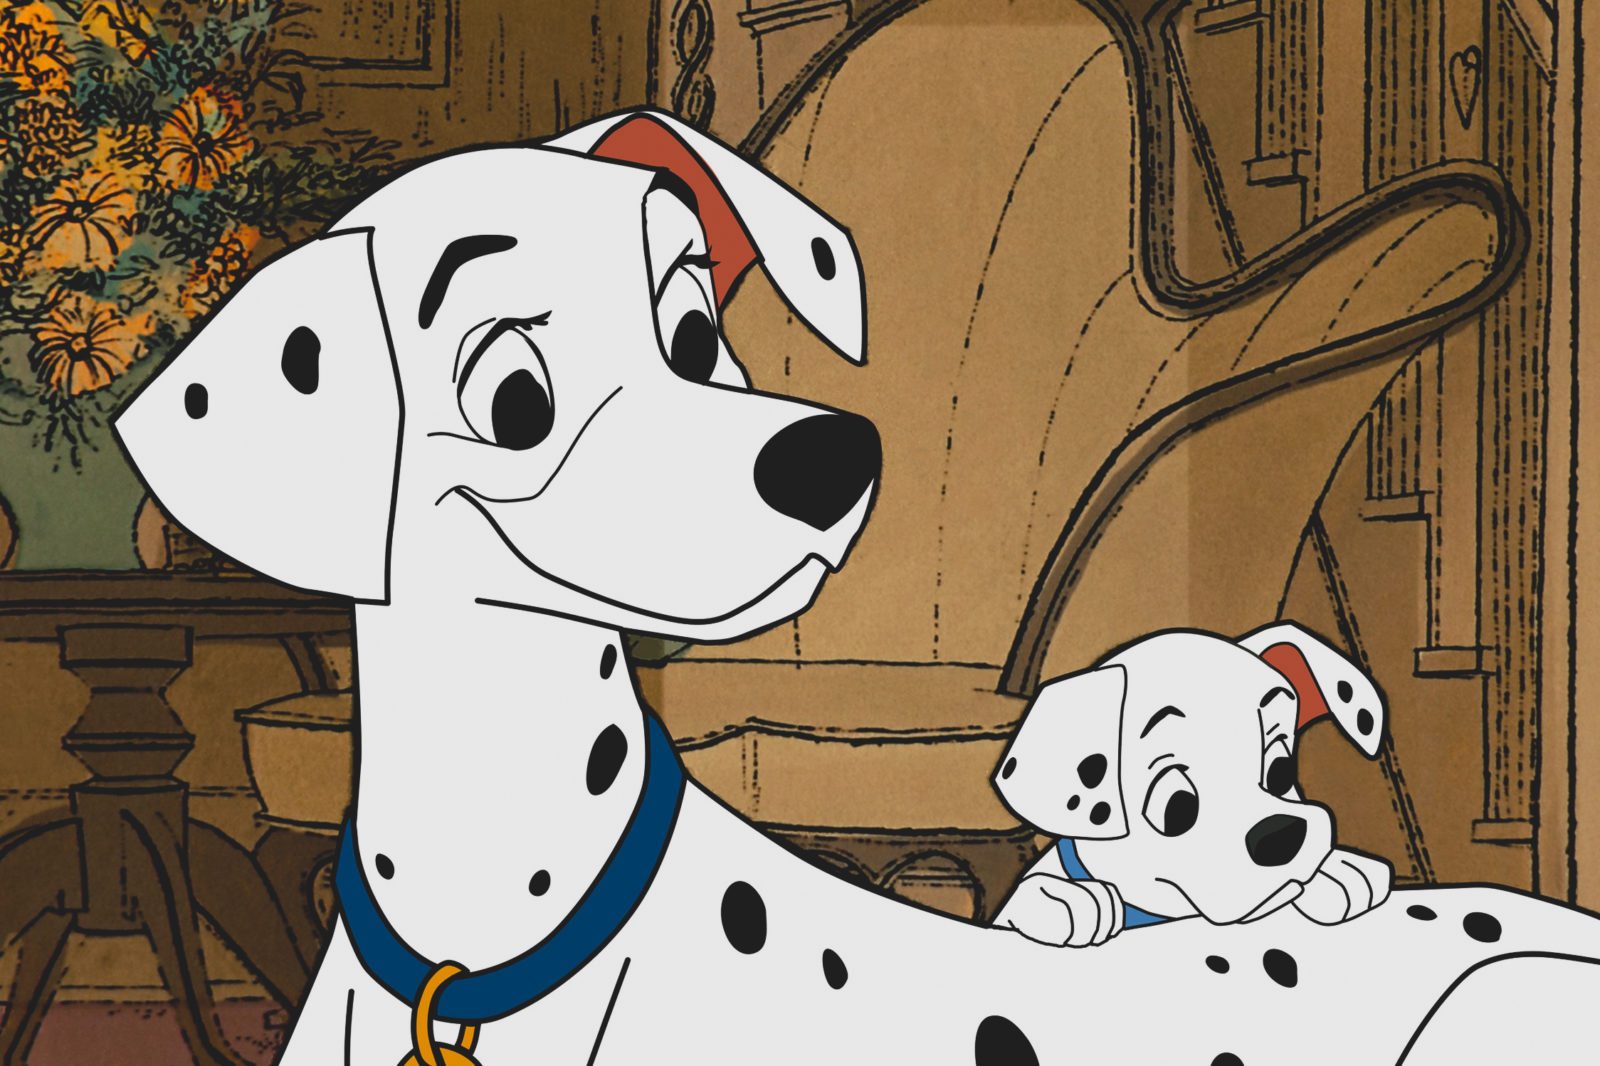 We Have to Talk About the Cosmic '101 Dalmatians' Sequel That Was Too Wild  for Disney - RELEVANT